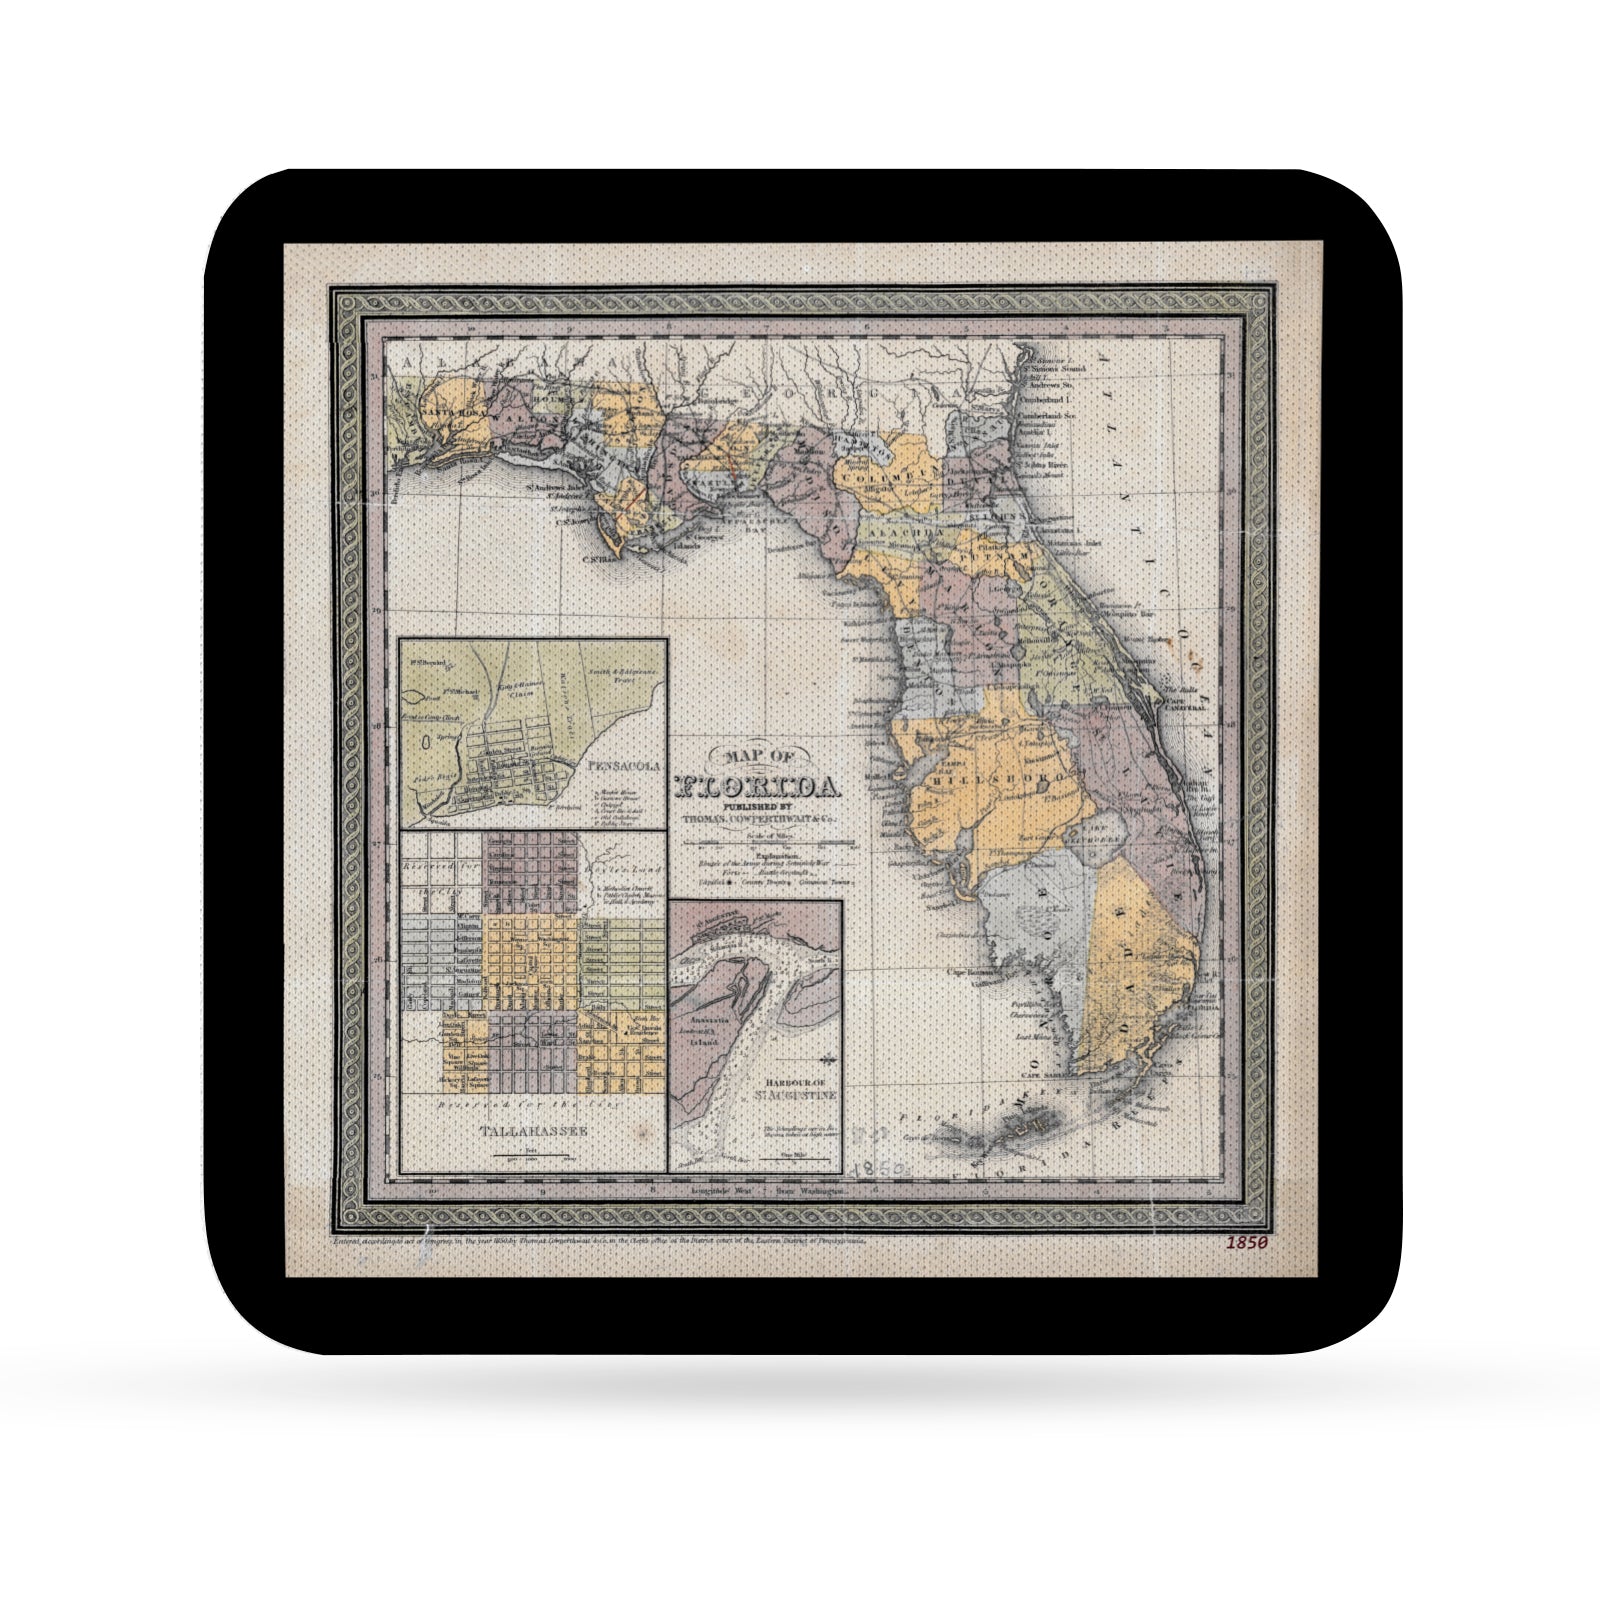 Drink coaster with an image of an old Florida map from 1850